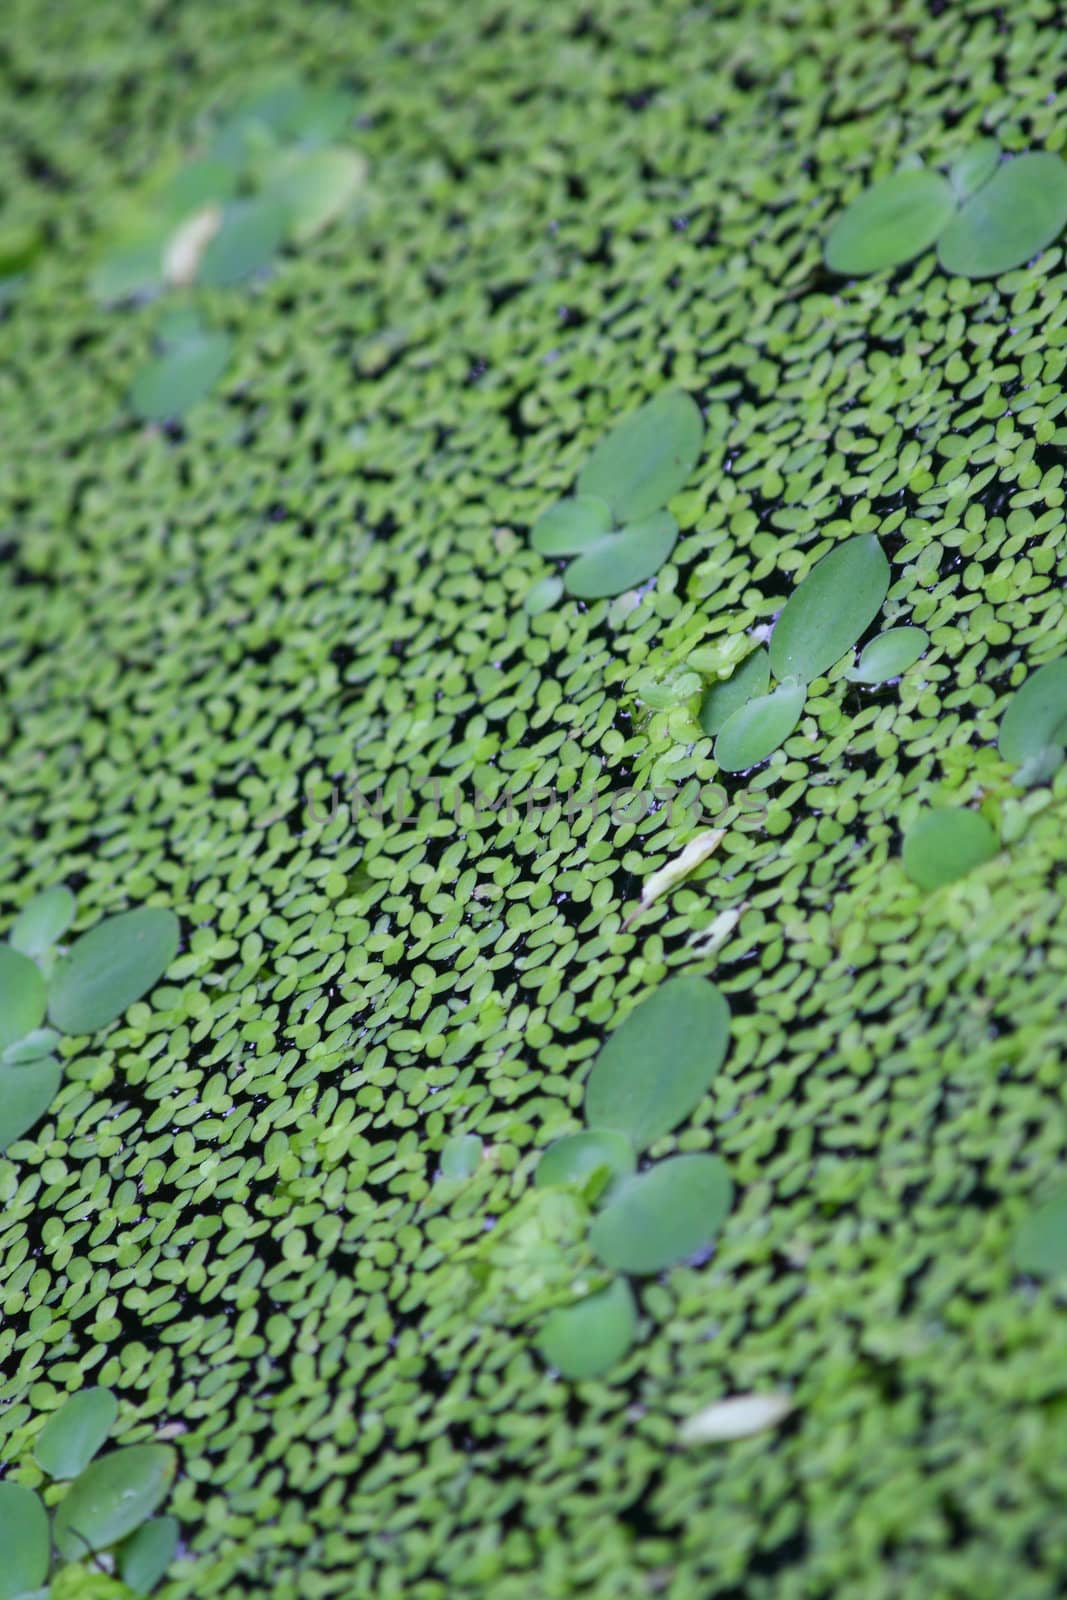 Close up of the green duckweed.